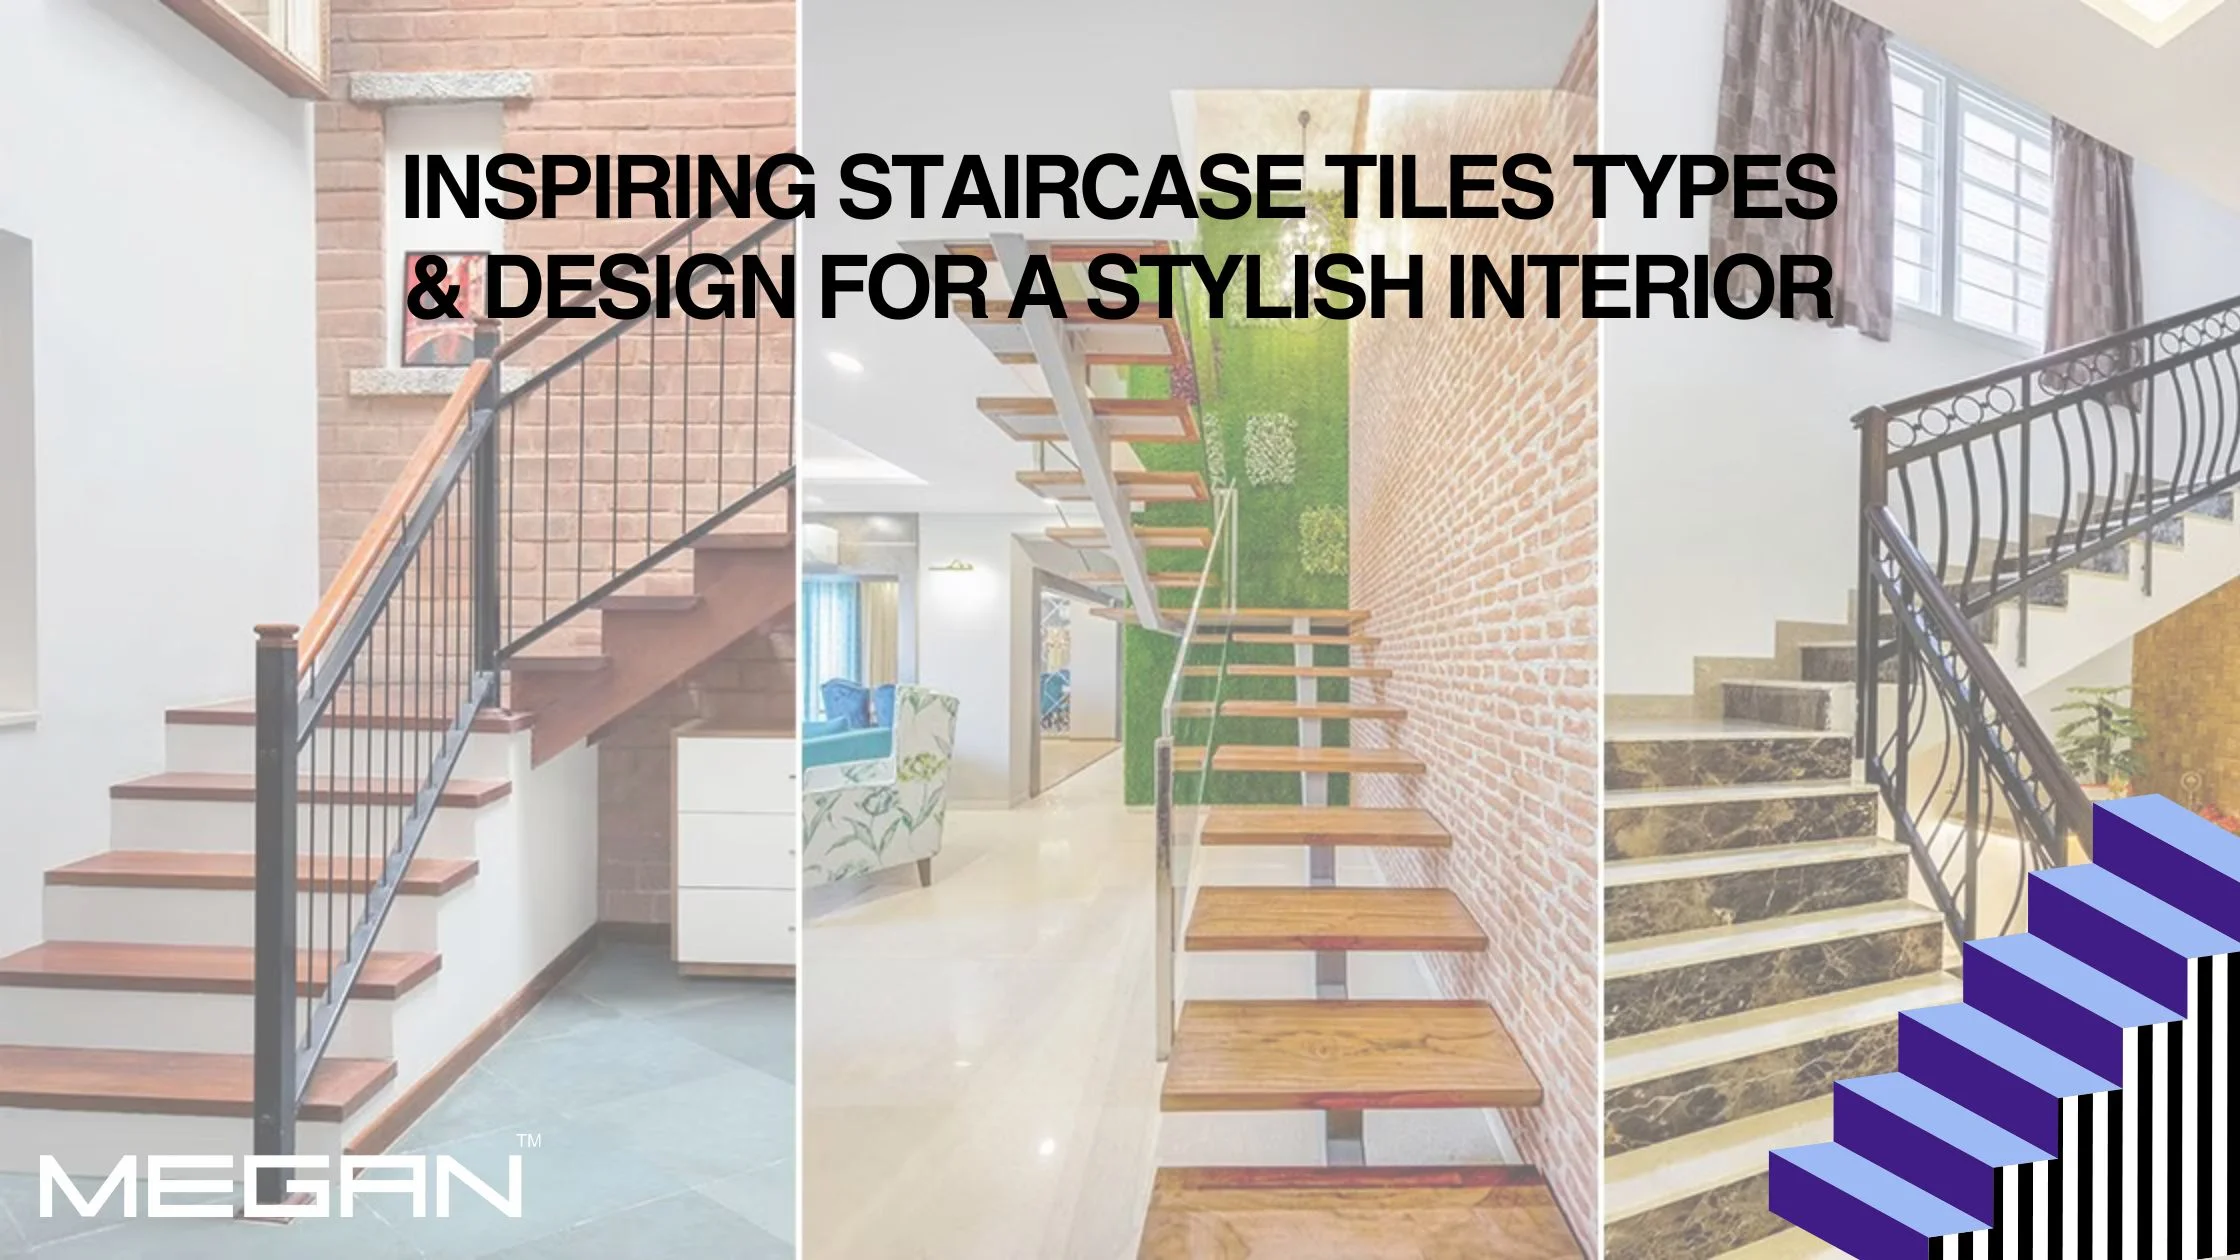 Inspiring Staircase Tiles Types & Design for a Stylish Interior